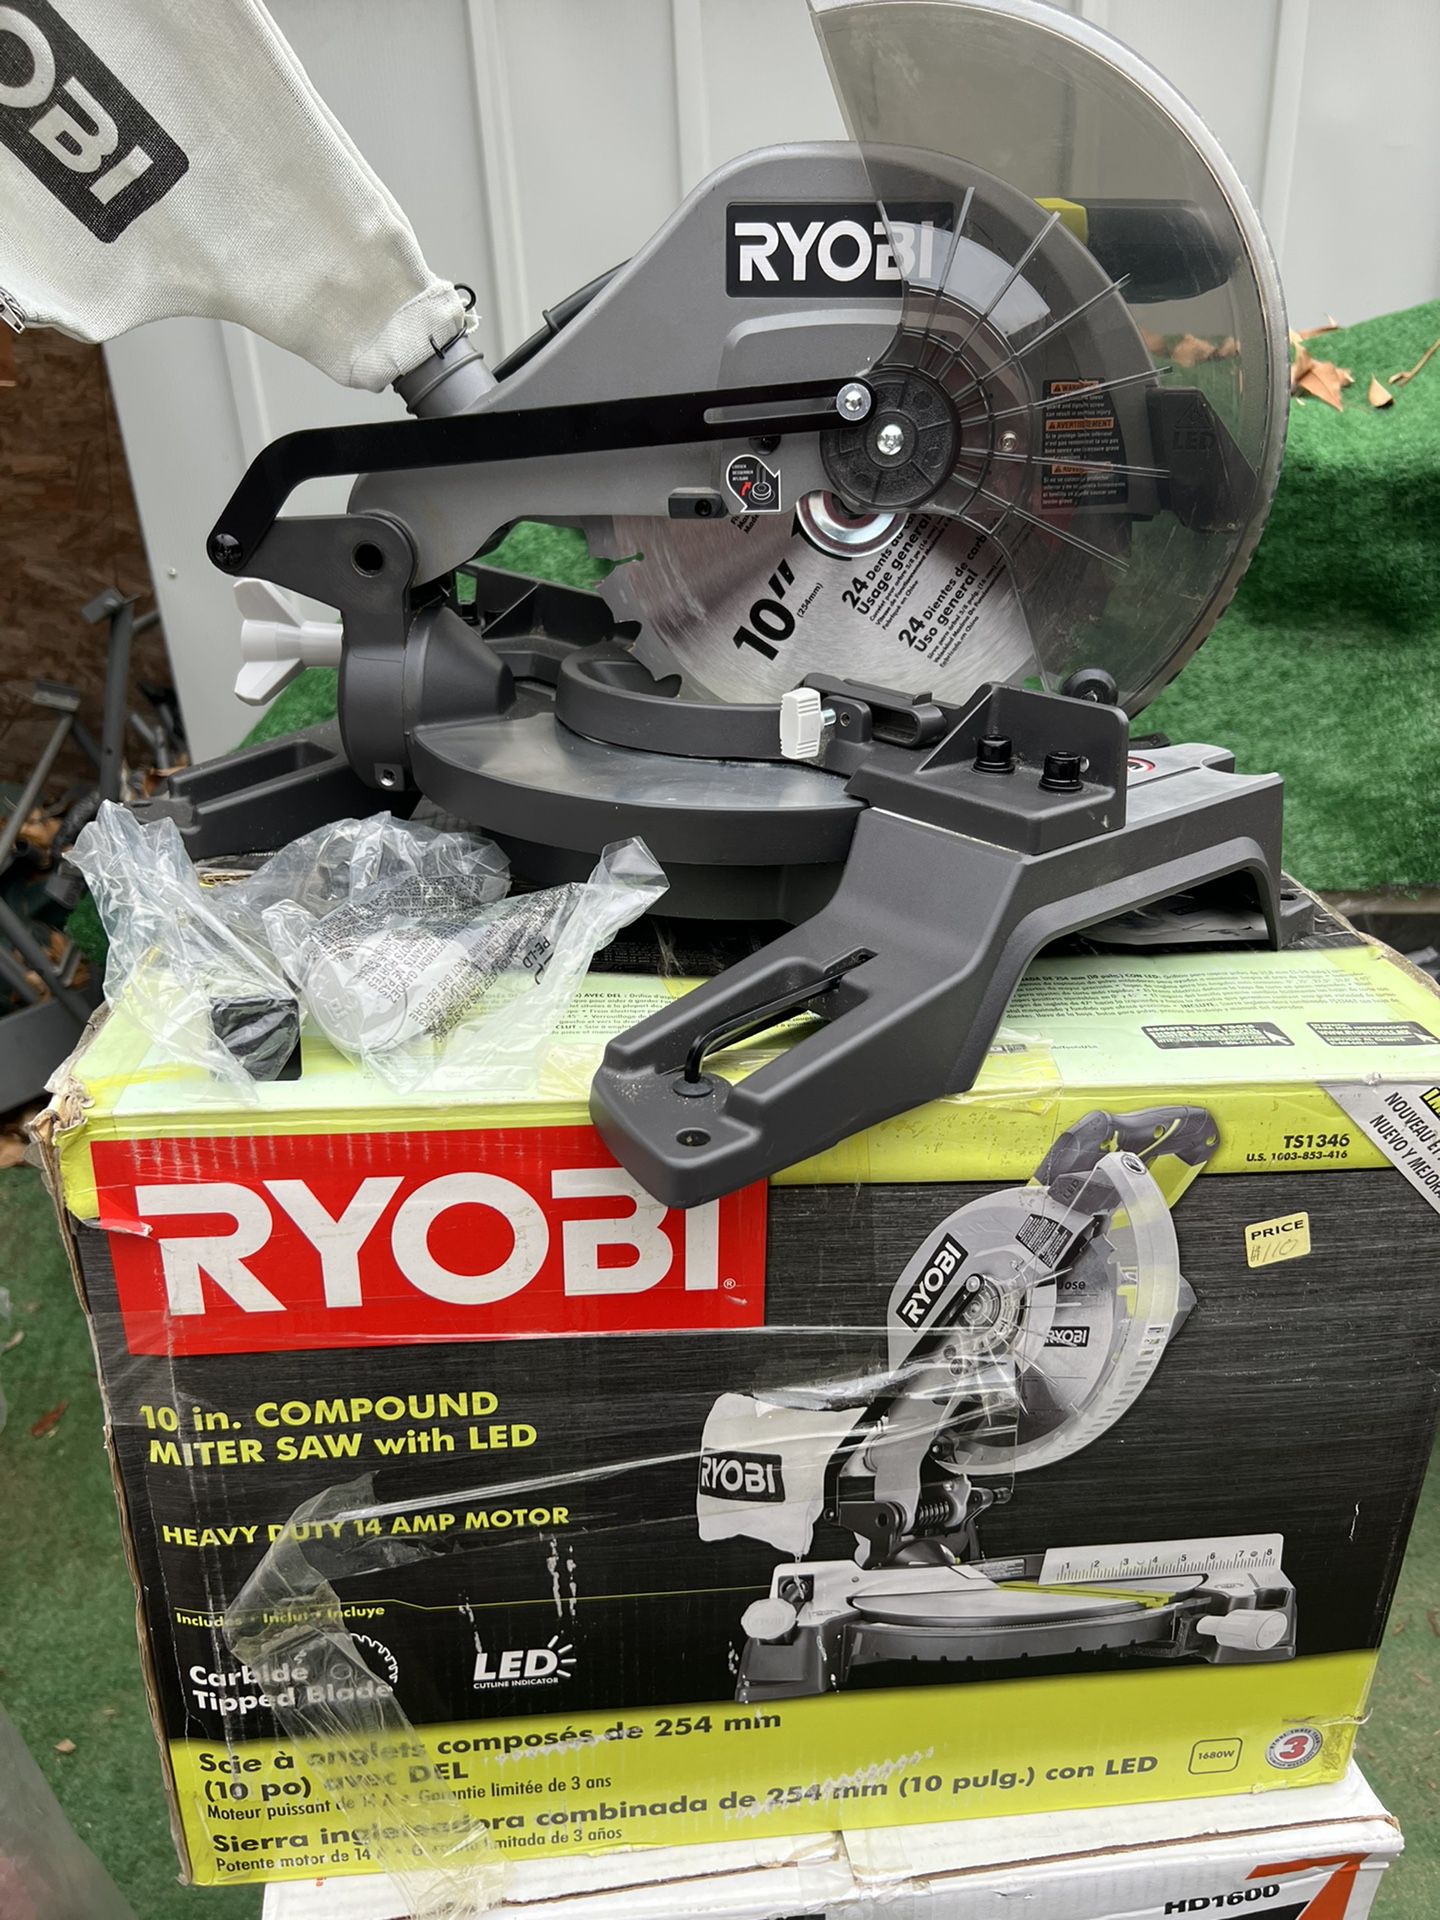 RYOBI 14 Amp Corded 10 in. Compound Miter Saw with LED Cutline Indicator  for Sale in La Habra Heights, CA OfferUp